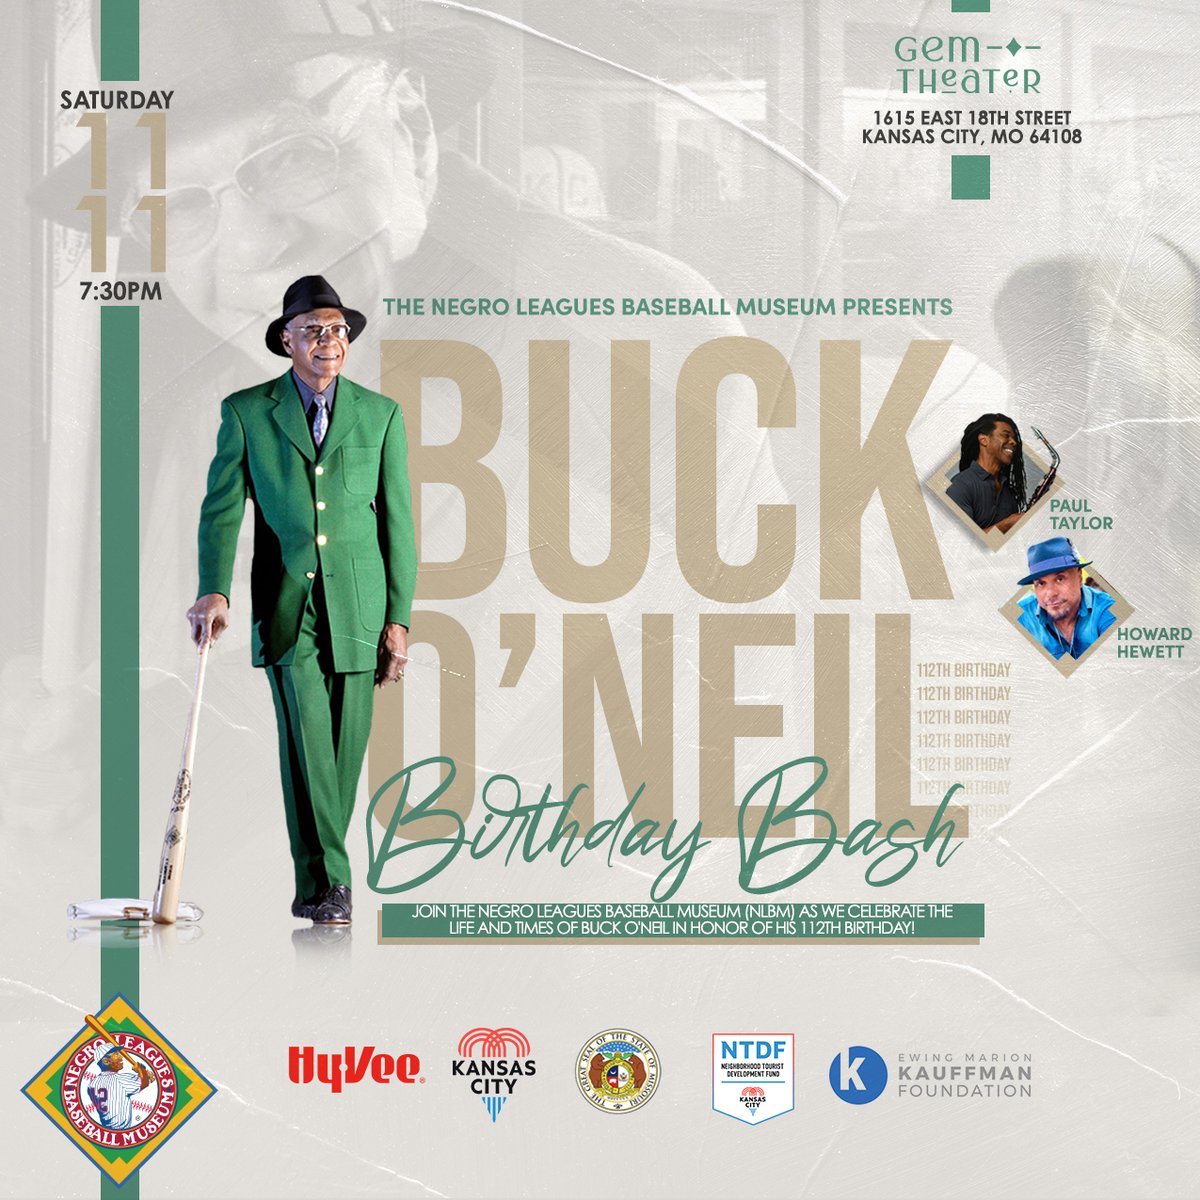 Hey KC! Join us as we celebrate the life and times of Buck O'Neil our Founder, and late Chairman. We've got a celebration planned that speaks to the HEART and SOUL of baseball's greatest ambassador. Use BUCK10 for $10 off your ticket. Details: bit.ly/46aM8IF